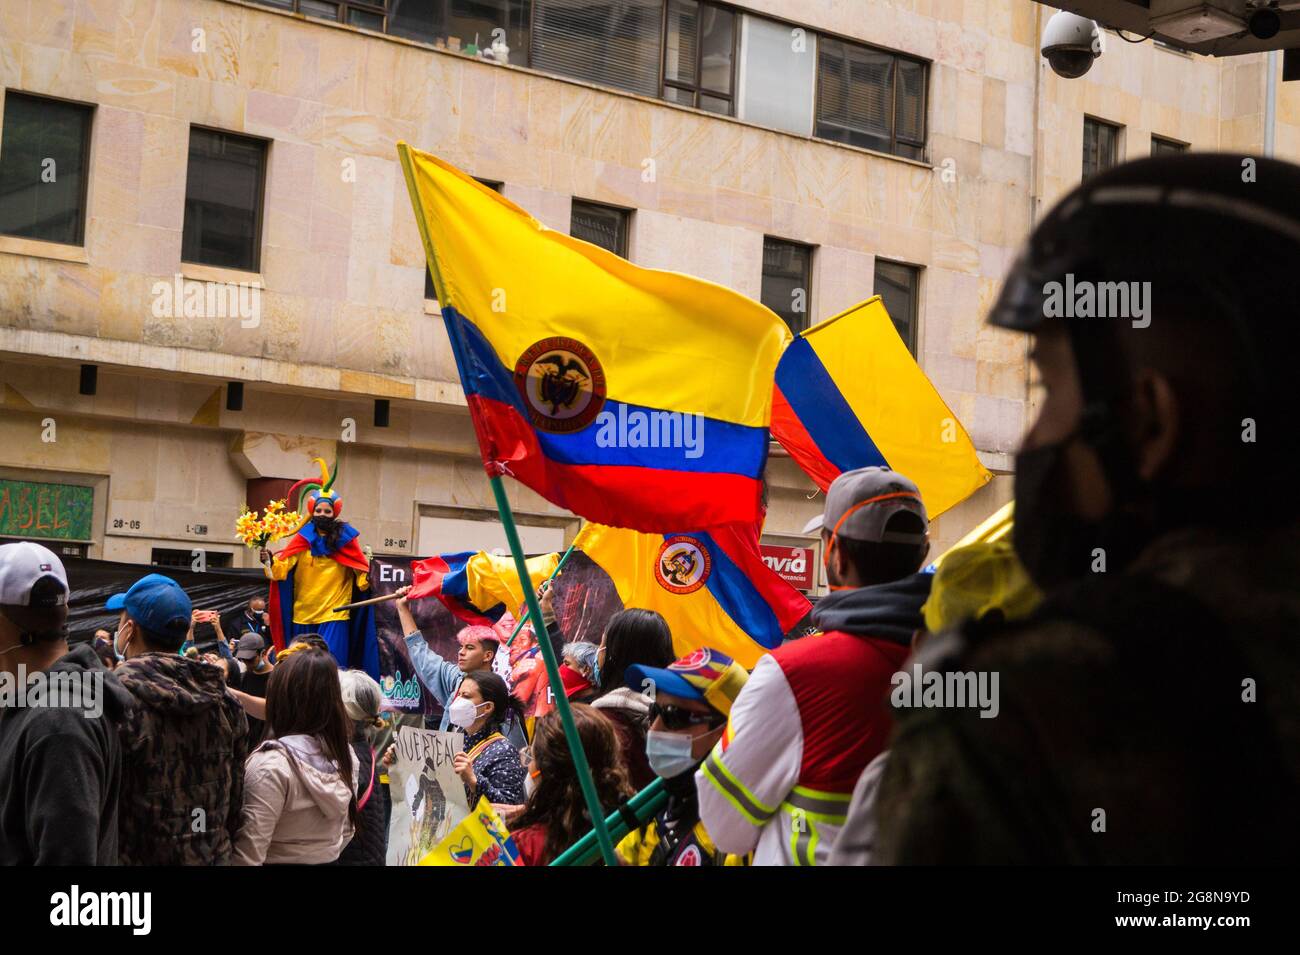 Demonstrators wave Colombian flags during a new day of anti-government protests during the 211 celebration of Colombia's independence from spain, protests raised into clashes in various cities after intervention by Colombia's riot police ESMAD, in Bogota, Colombia on July 20, 2021. Stock Photo